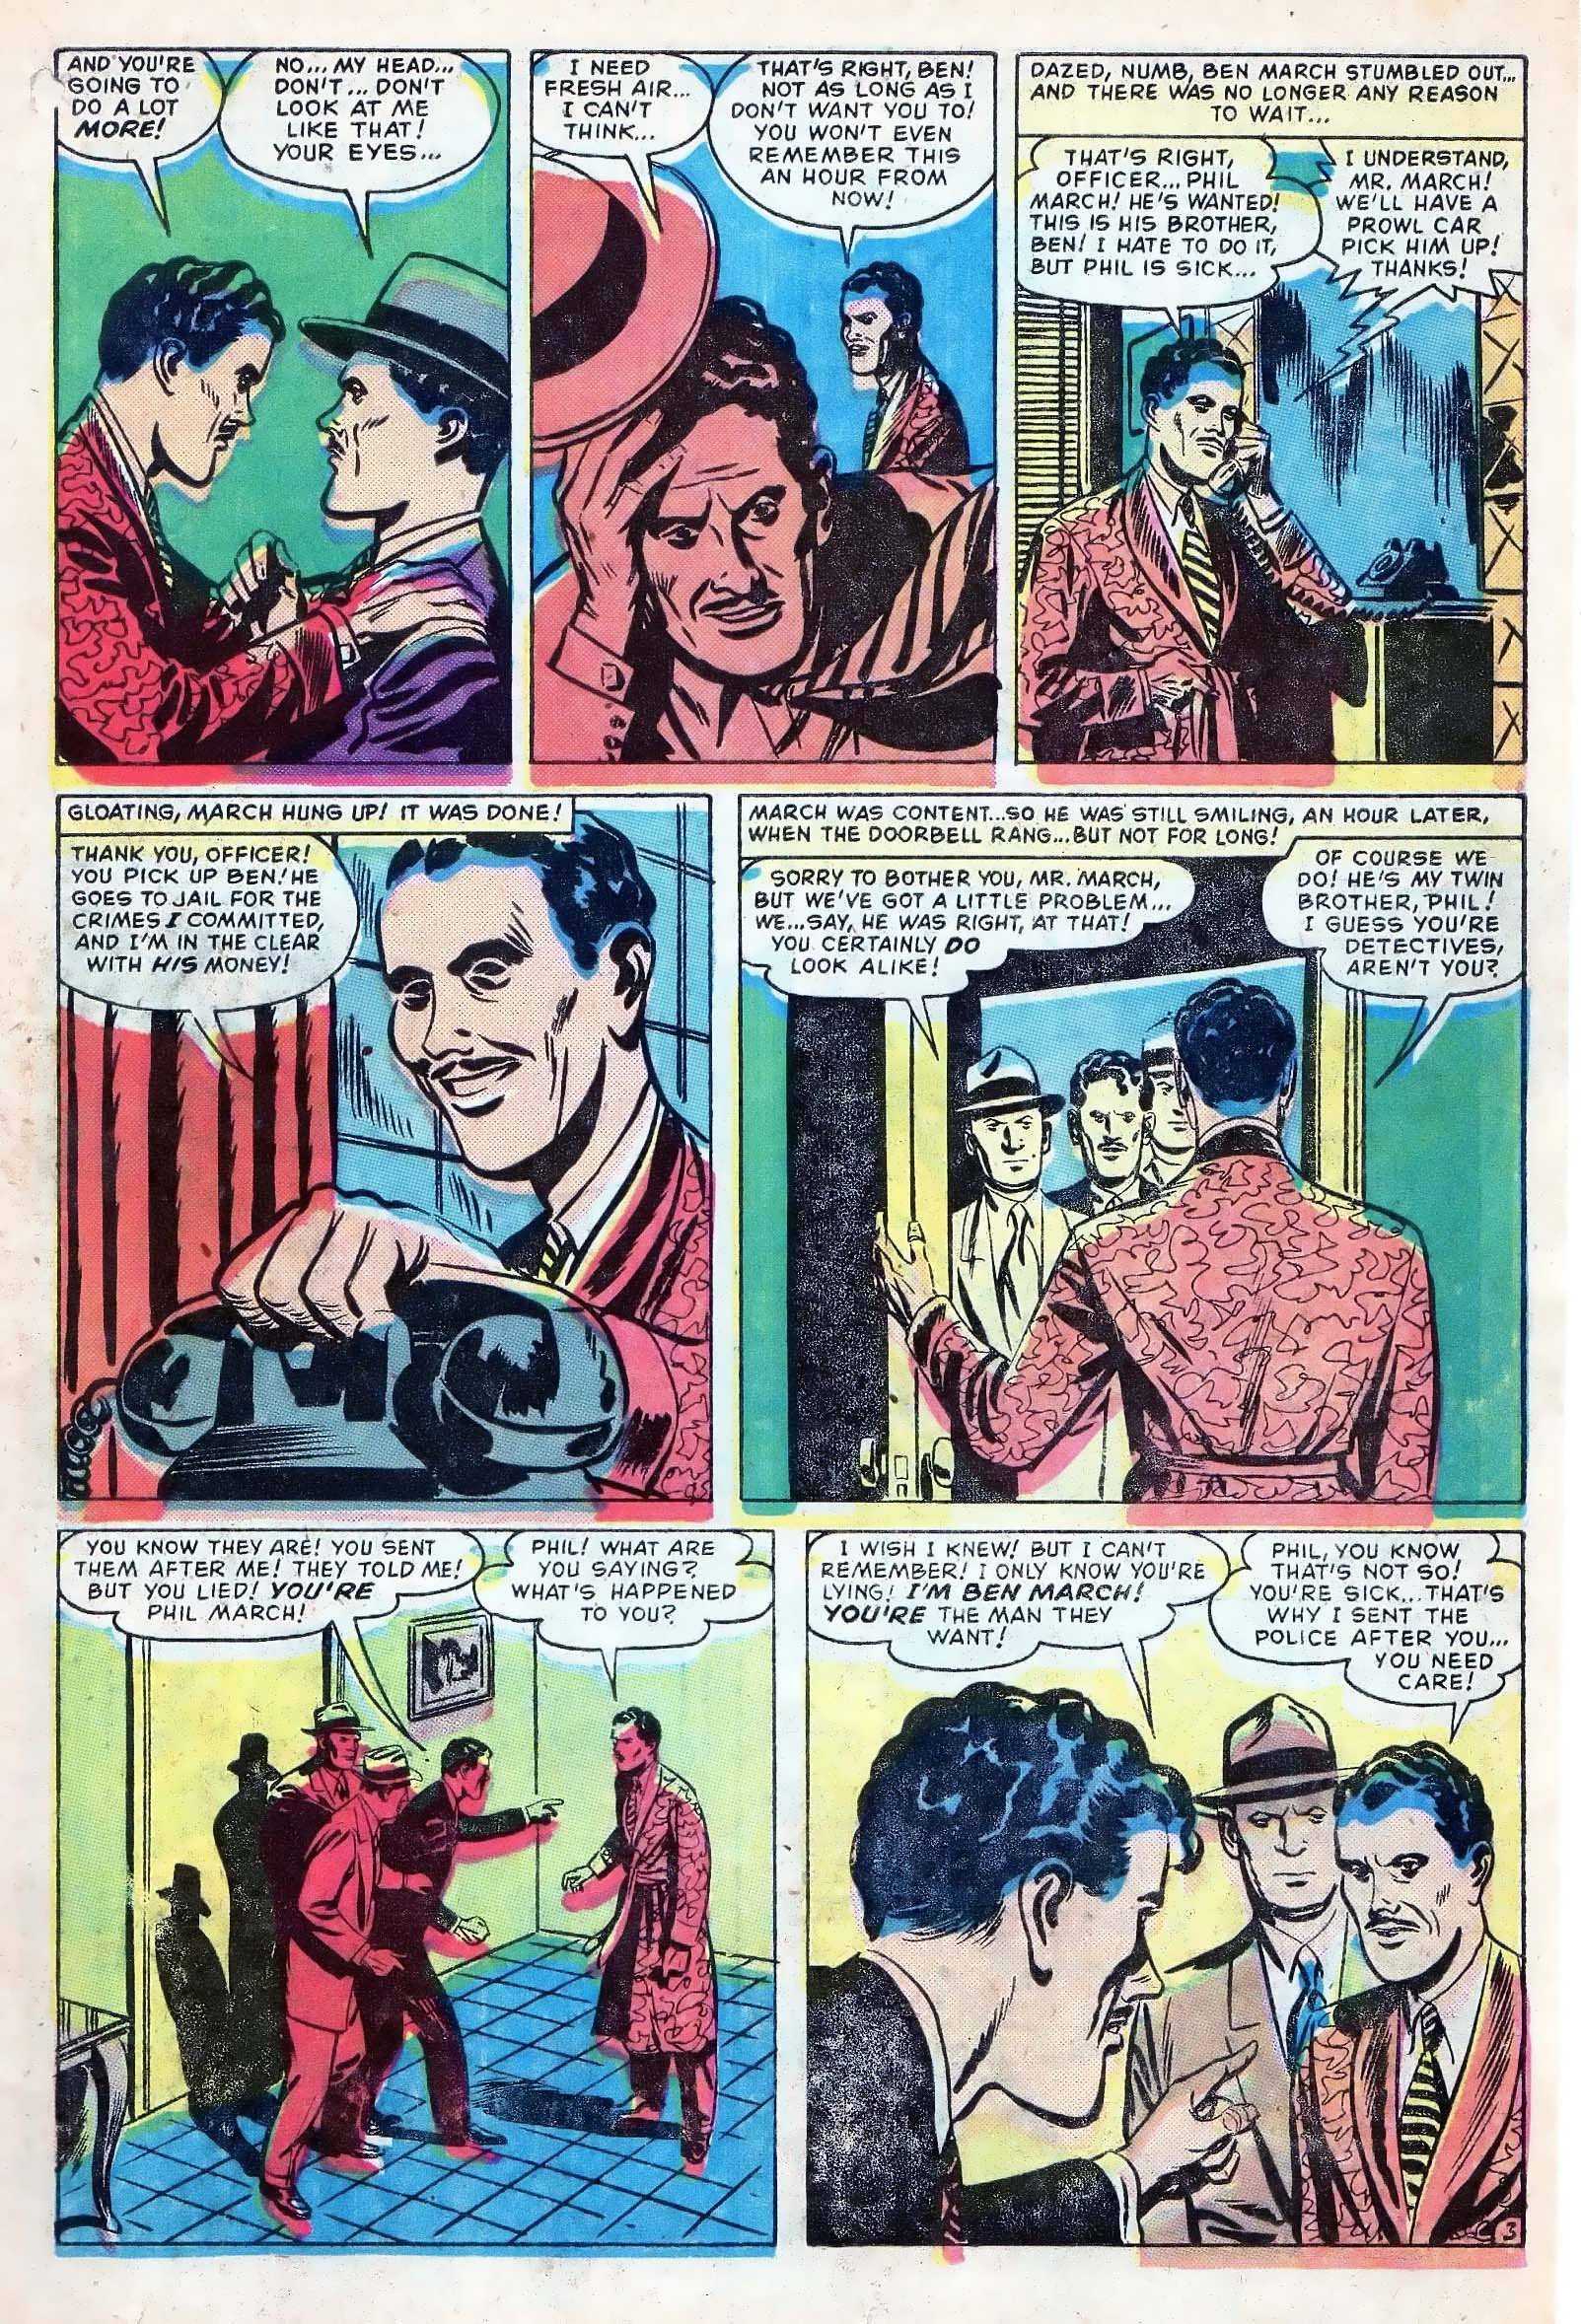 Marvel Tales (1949) 157 Page 14